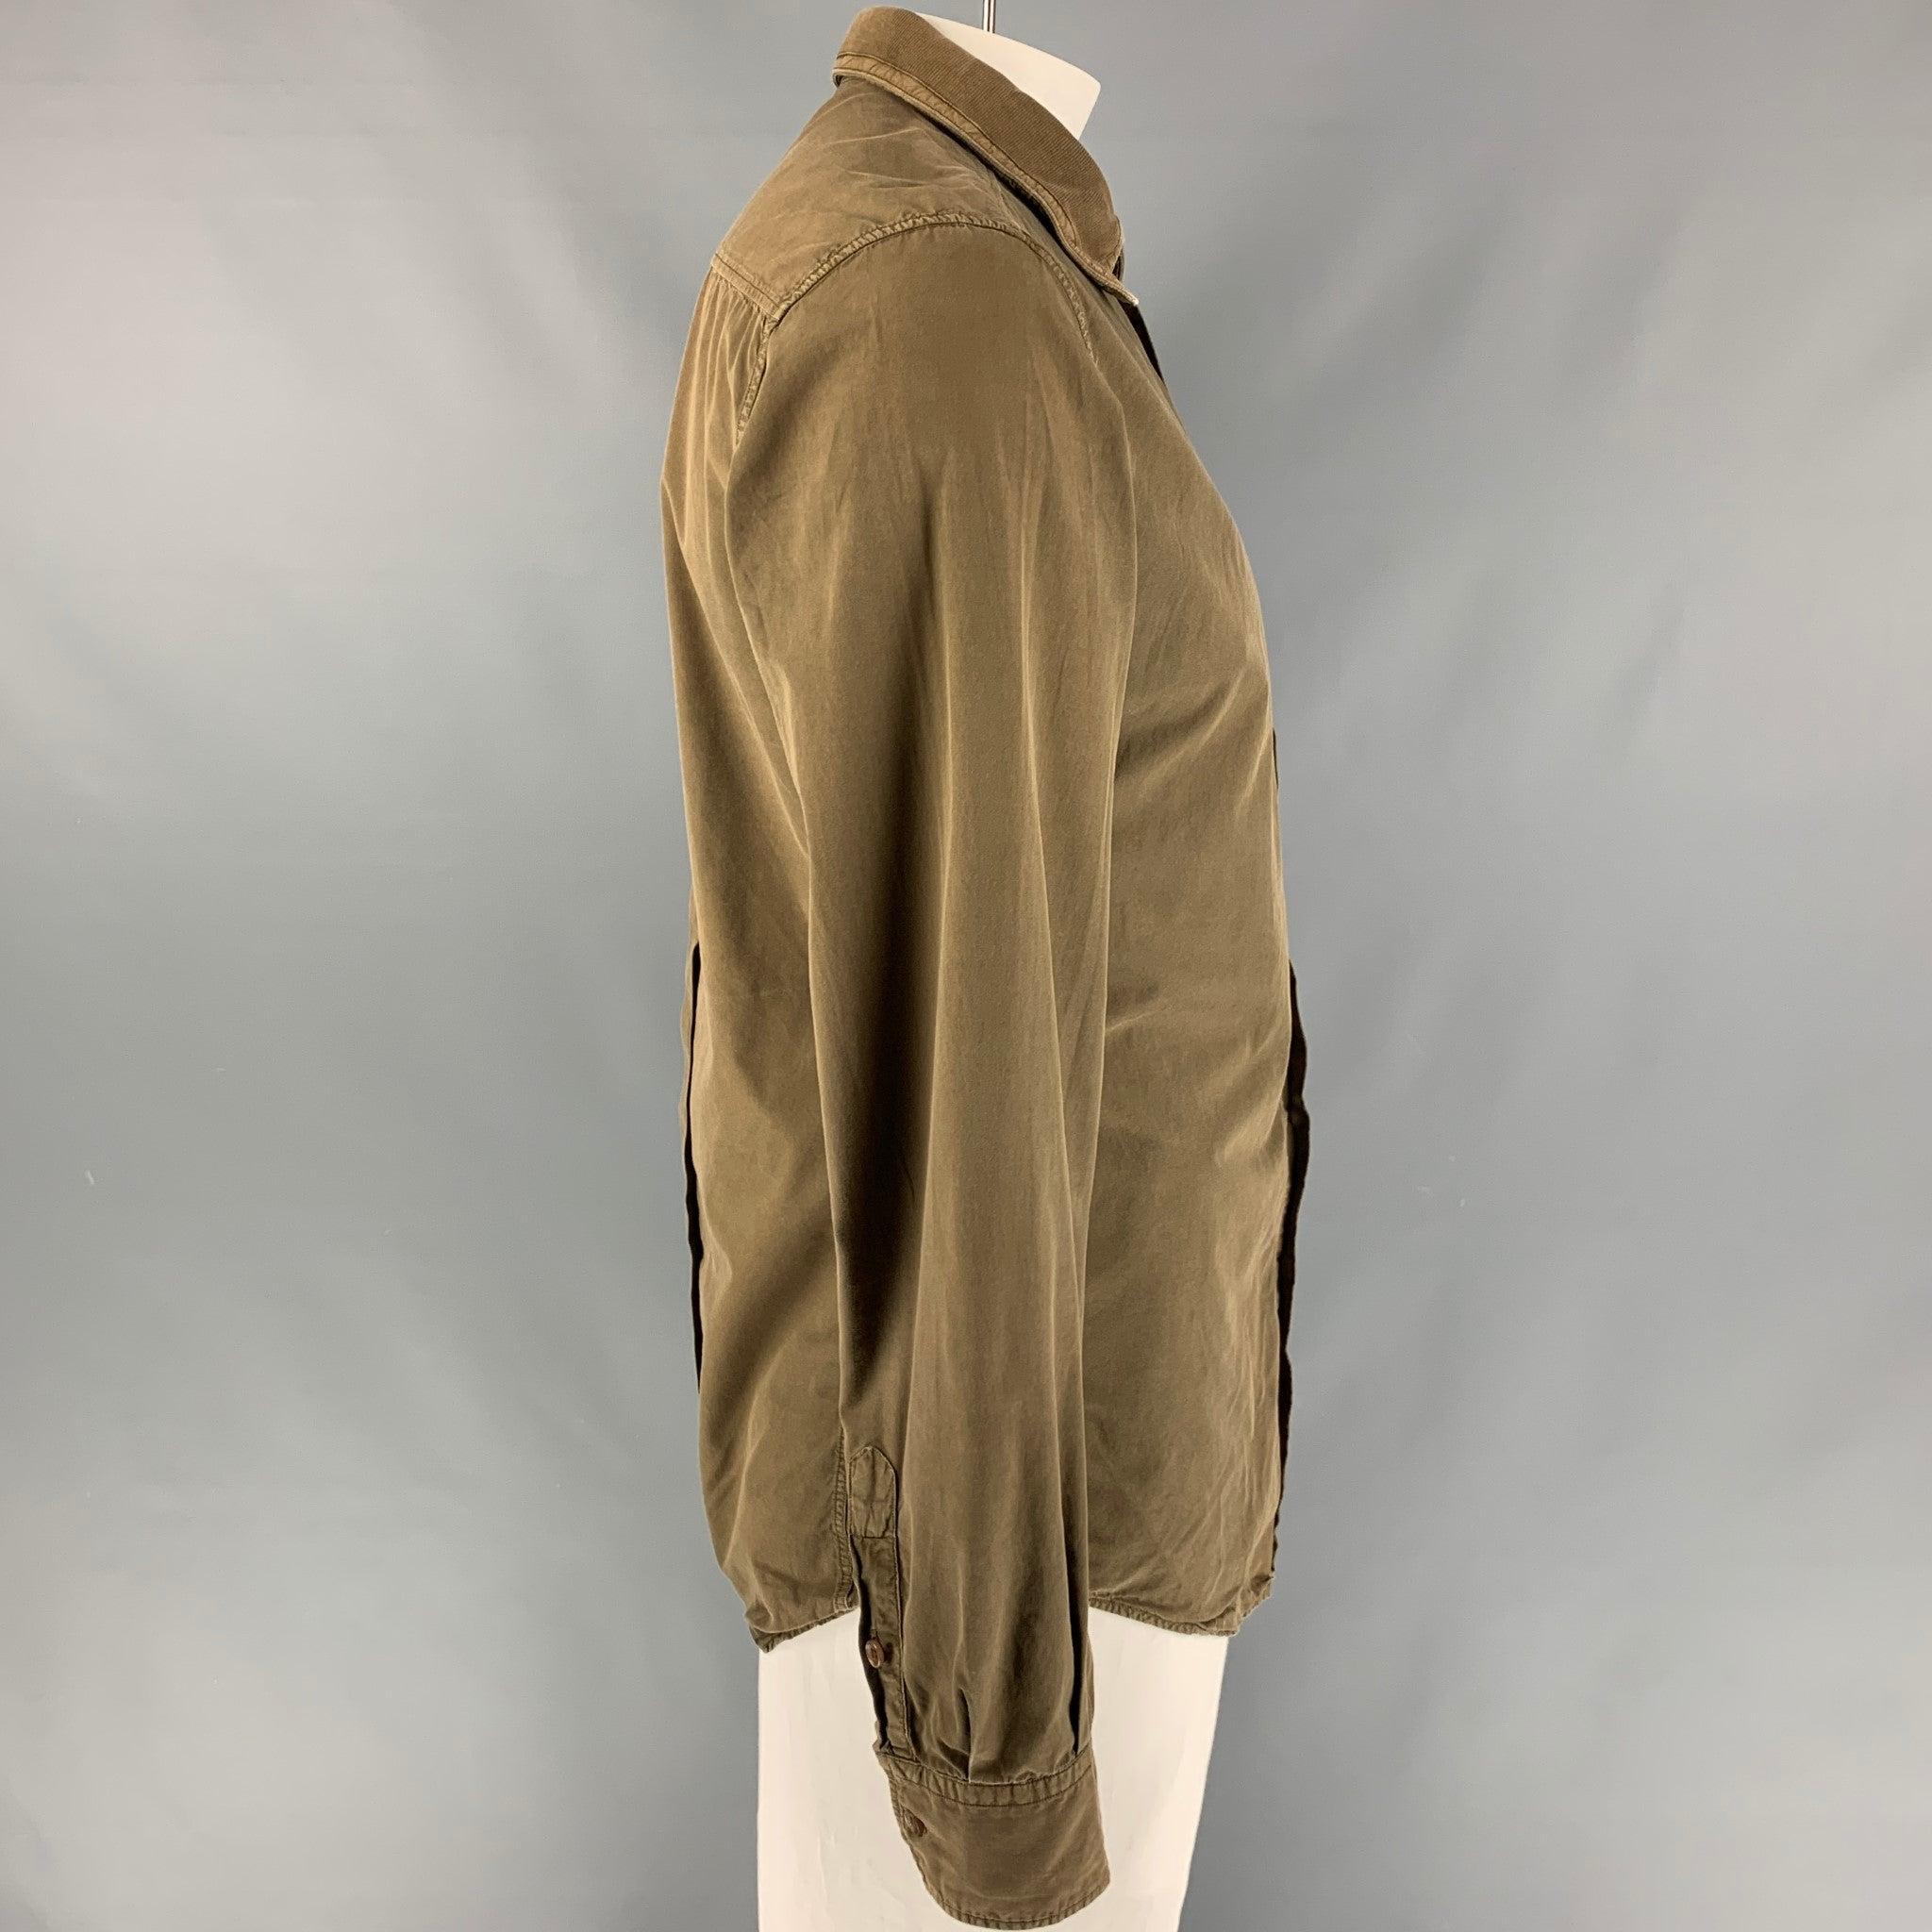 D&G by DOLCE & GABBANA long sleeve shirt comes in brown cotton featuring spread collar with a ribbed texture, and button up closure. Good Pre-Owned Condition. Moderate signs of wear. 

Marked:   52  

Measurements: 
 
Shoulder: 28 inches Chest: 44